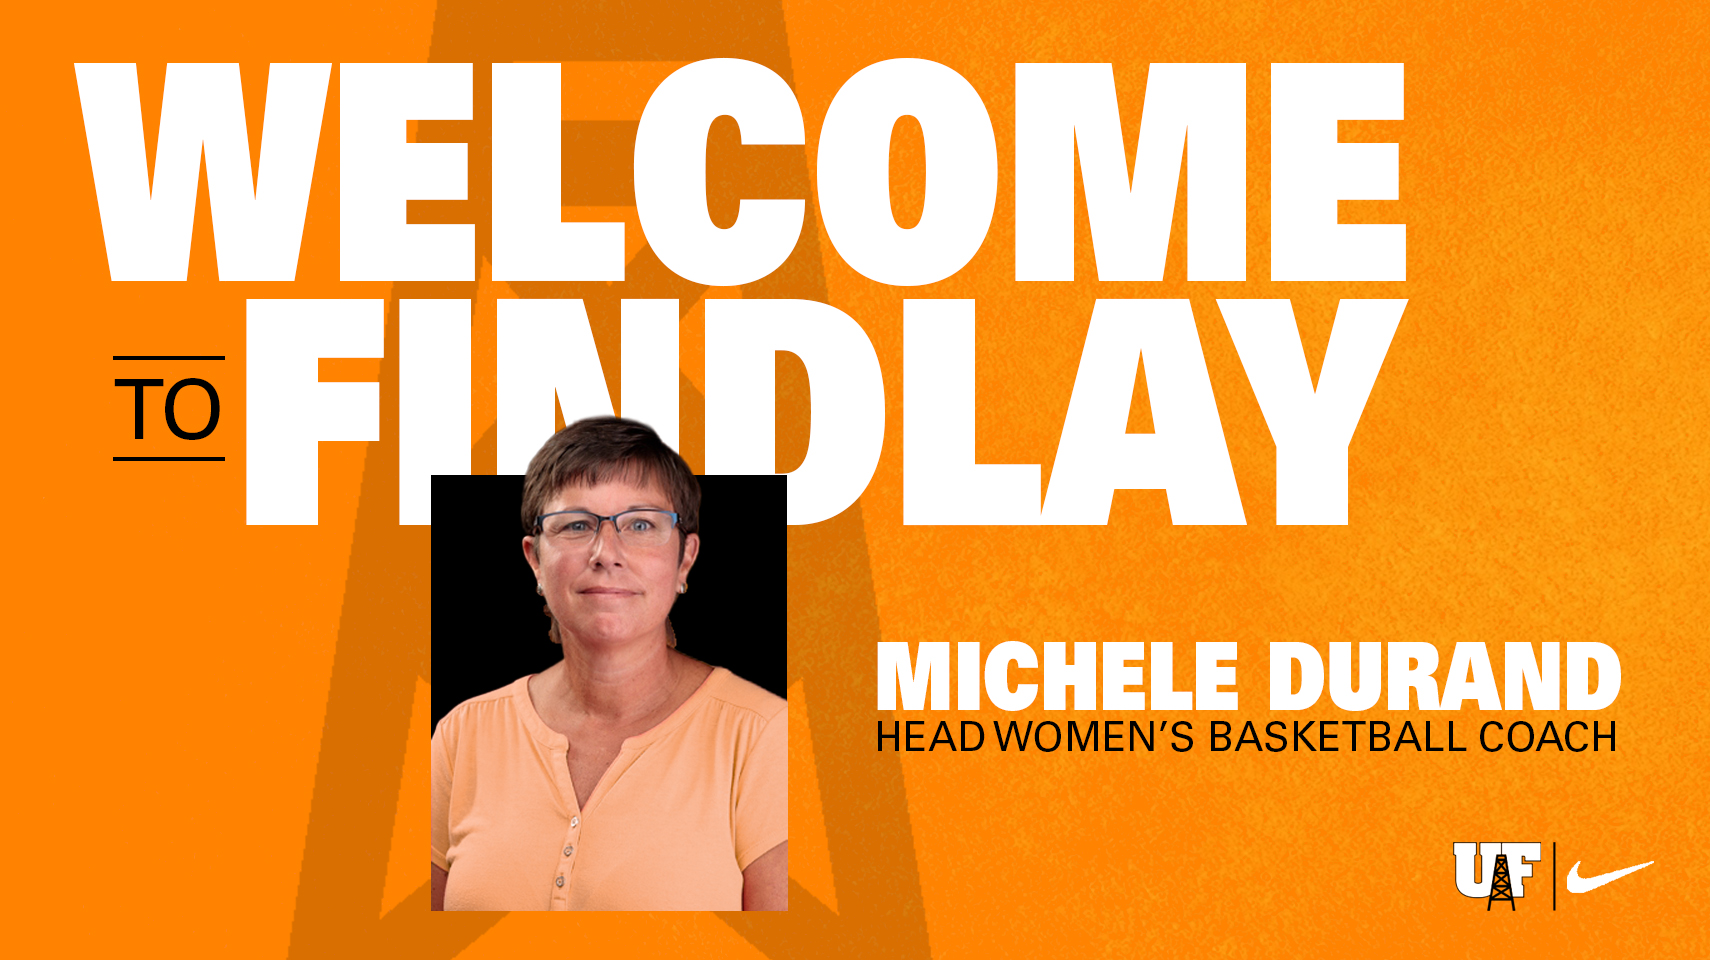 University of Findlay hires Michele Durand as their new women's basketball coach